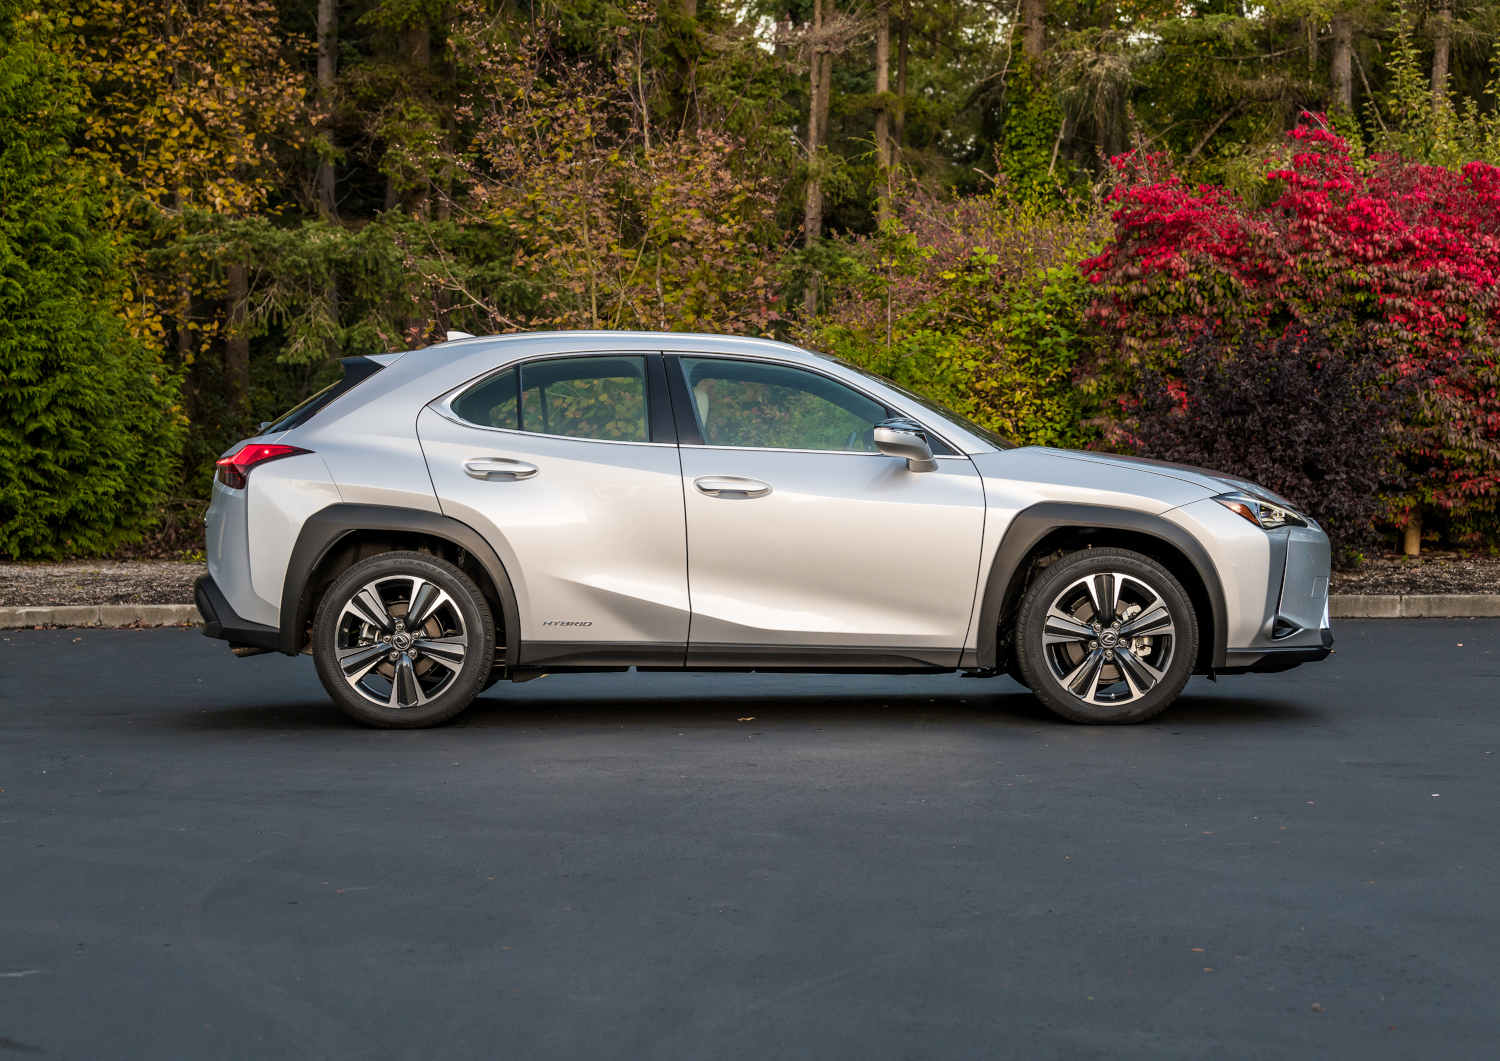 This Lexus UX is a good SUV